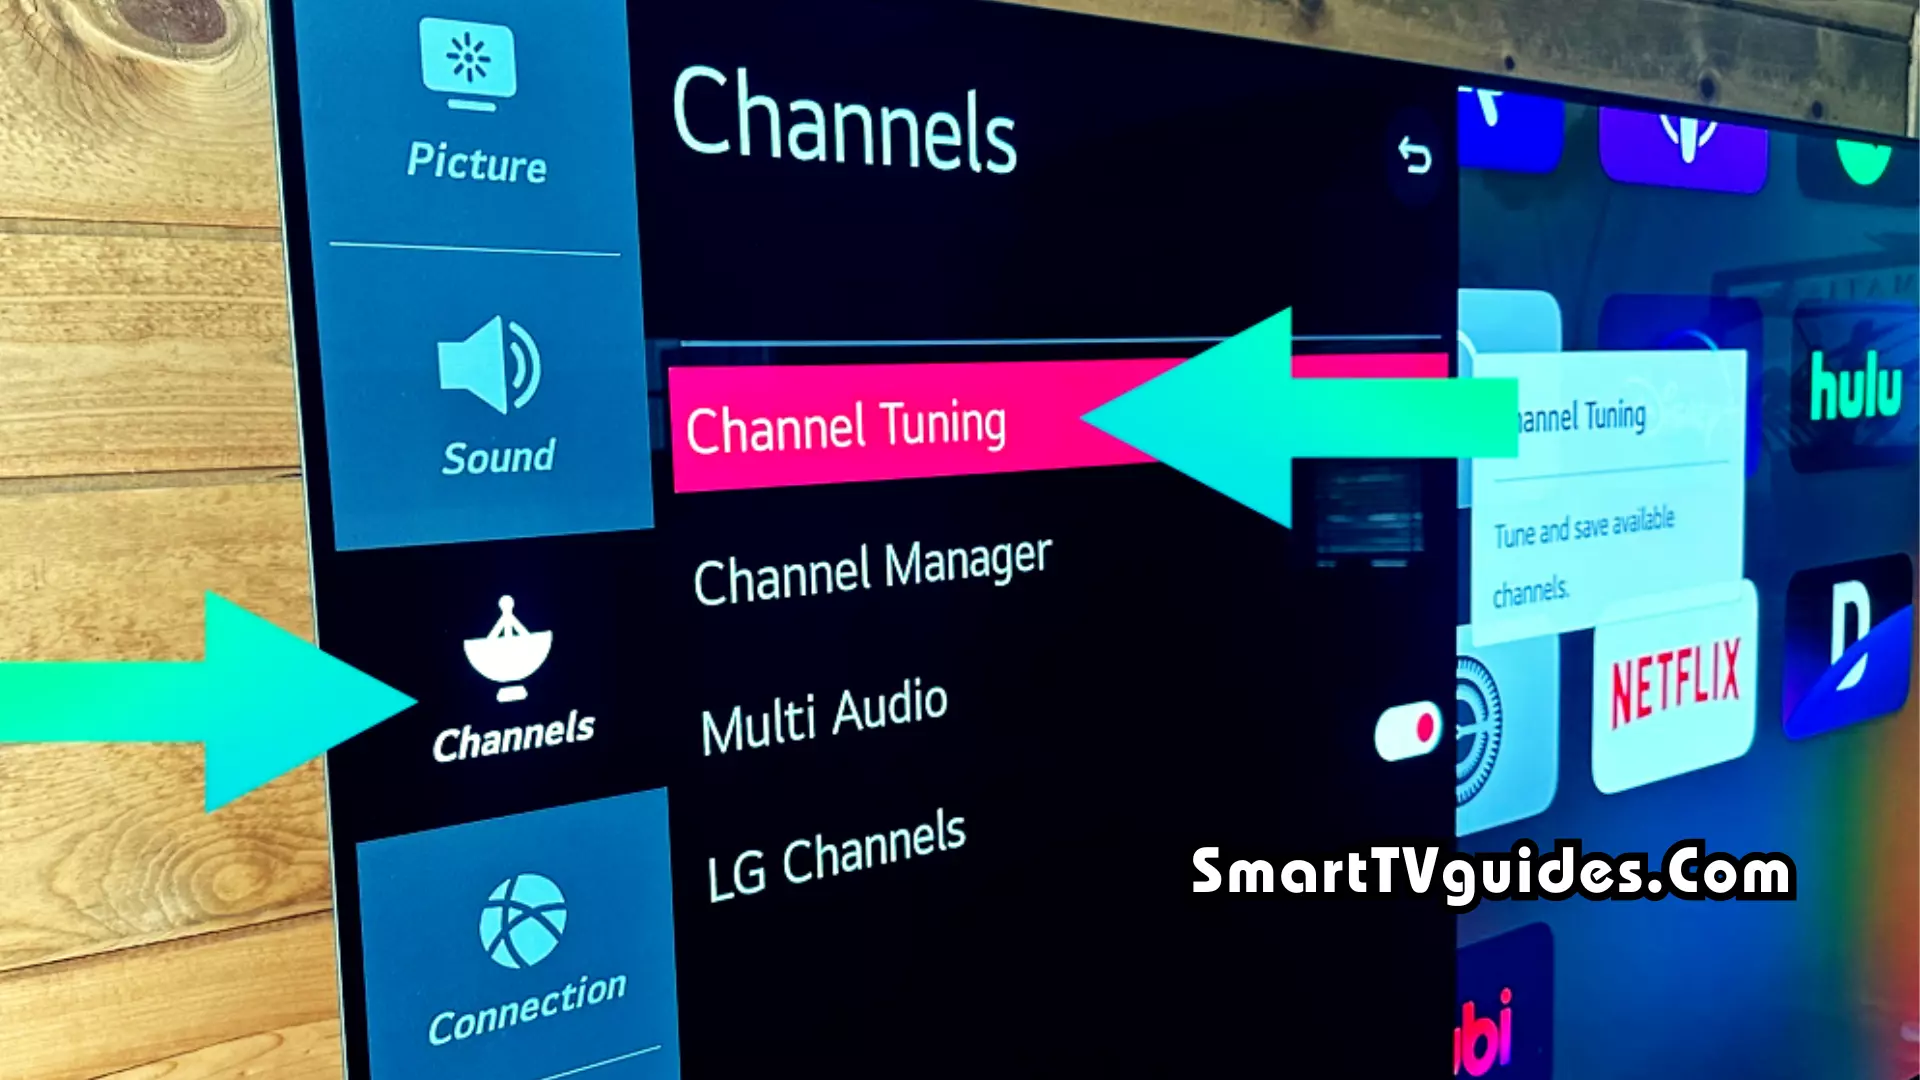 ‘Channel Tuning’ On Your LG TV